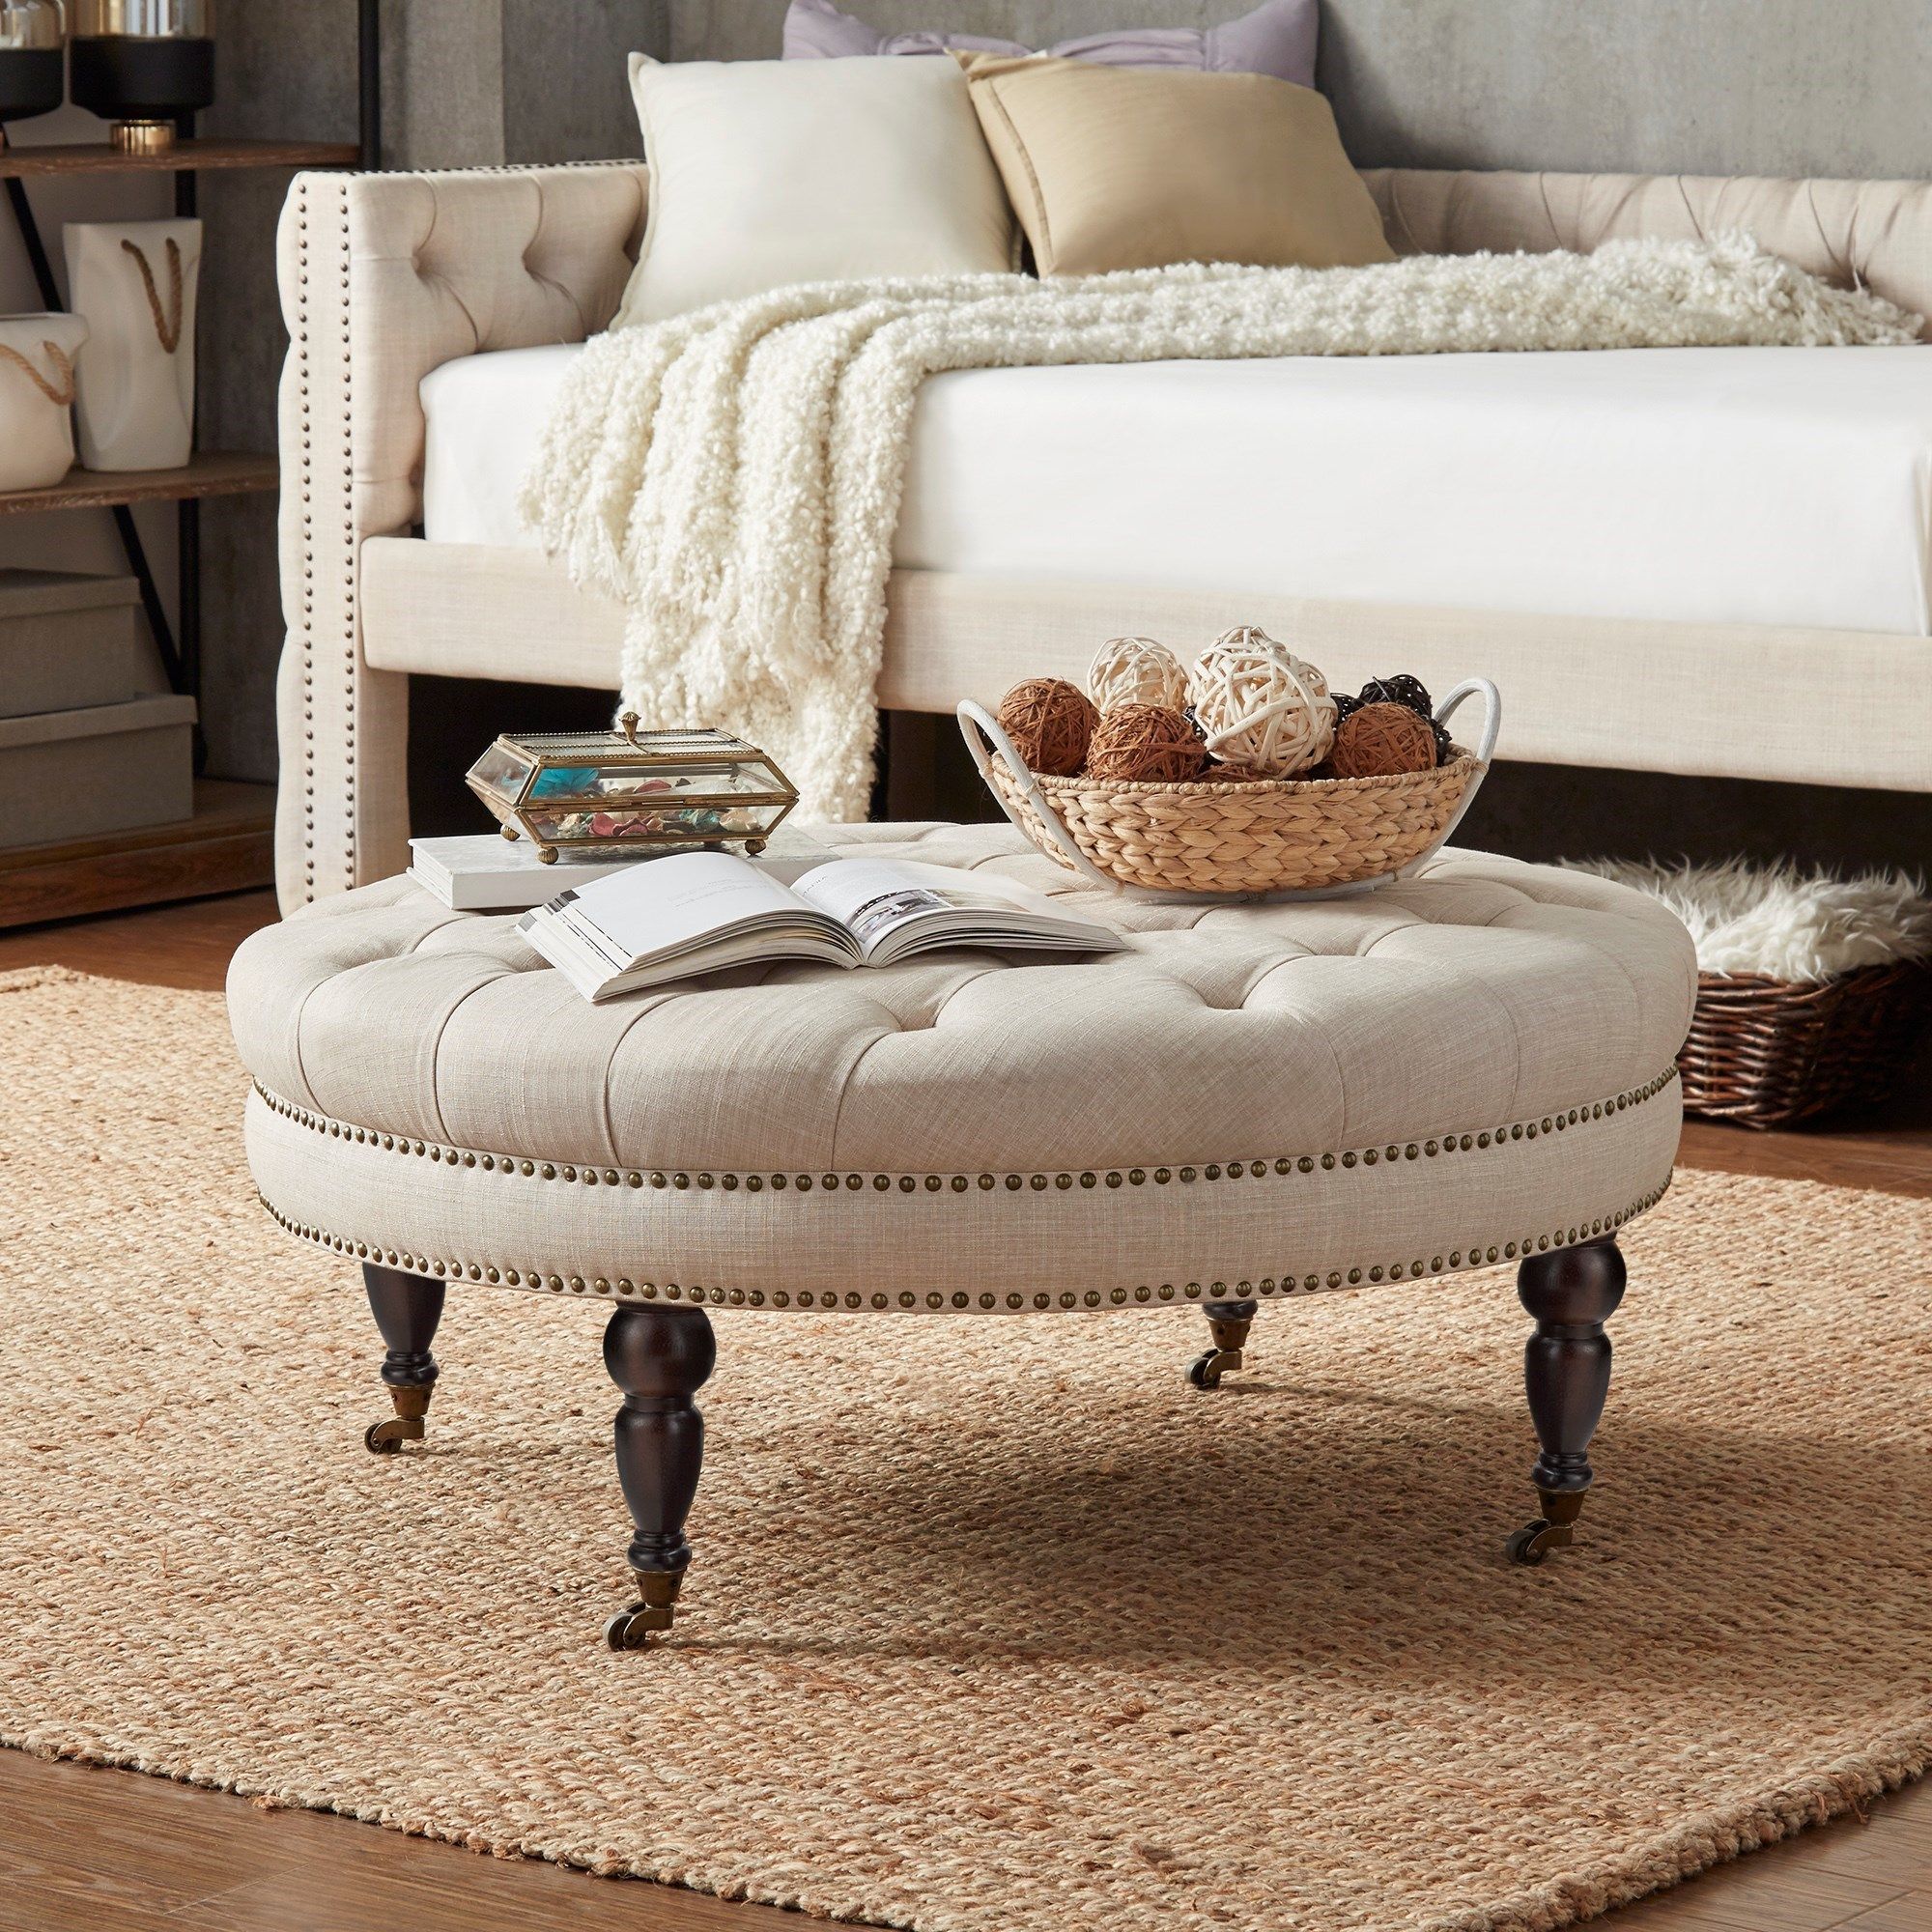 Homelegance E208rd Traditional Round Tufted Bench Ottoman With Casters Throughout Round Pouf Ottomans (View 10 of 20)